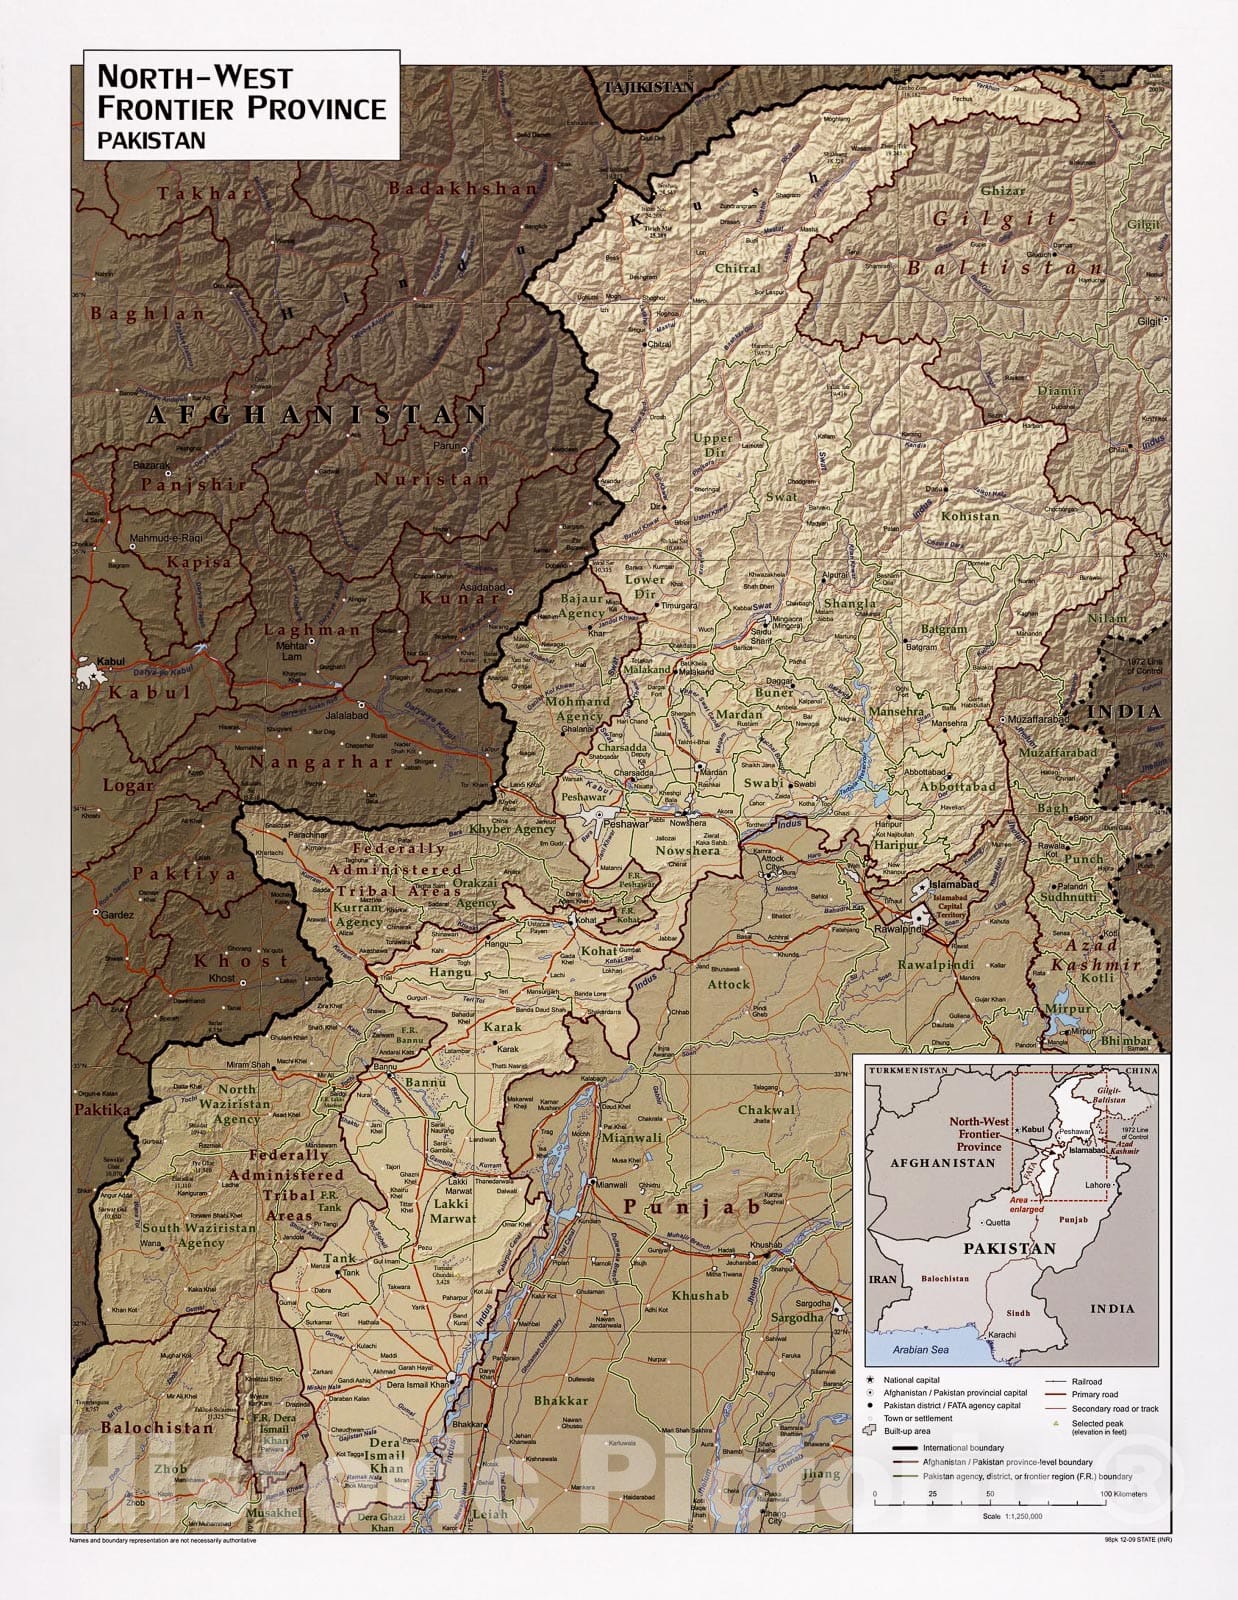 Historic 2009 Map - North-West Frontier Province, Pakistan.